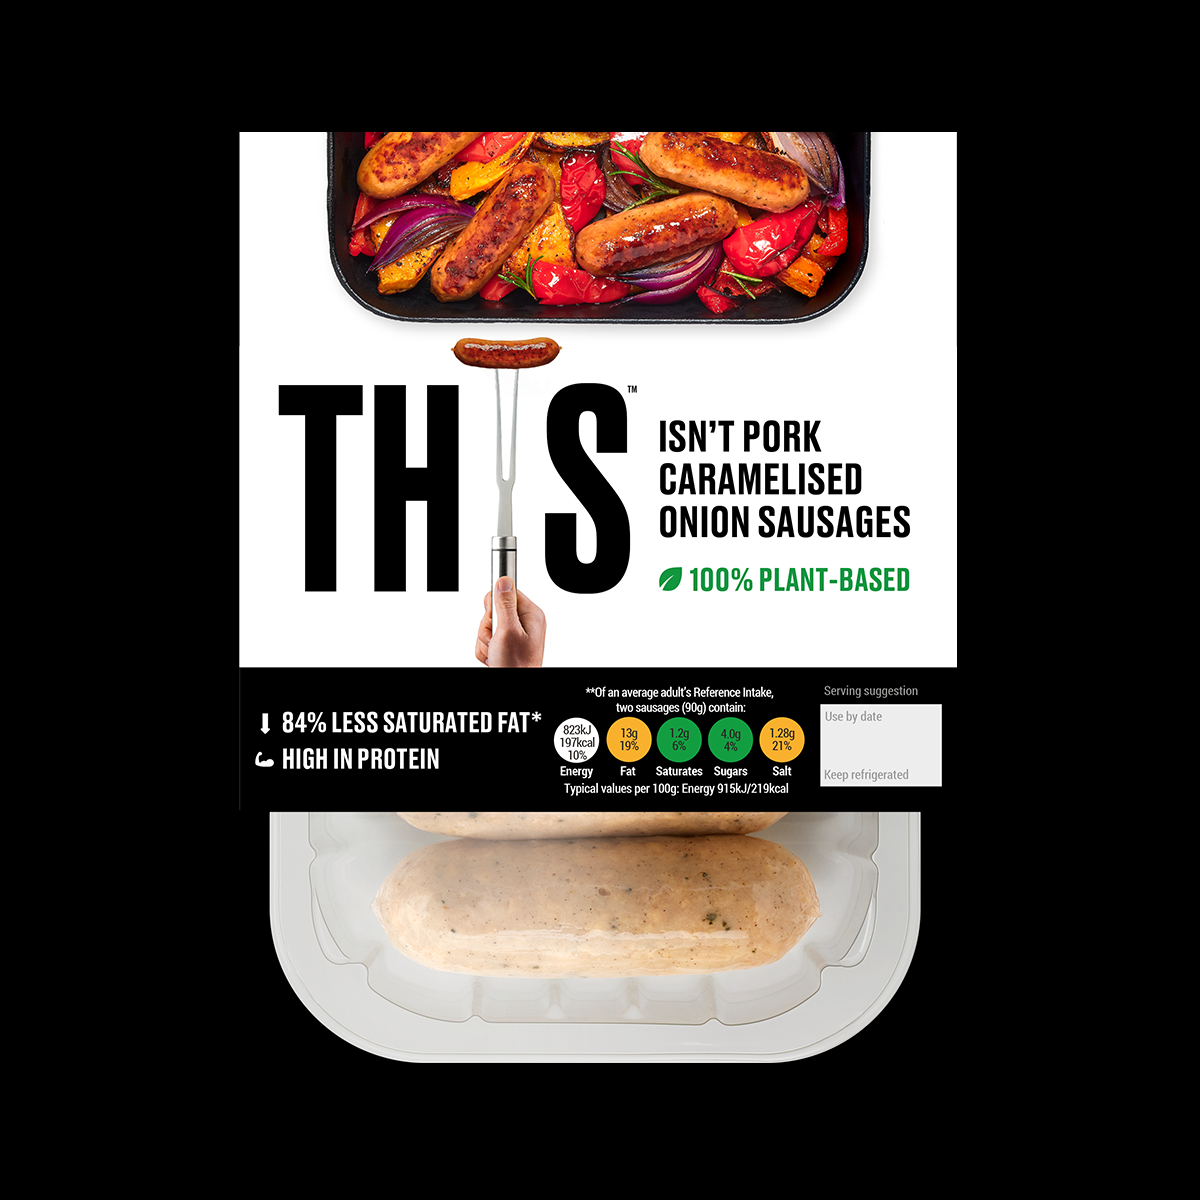 Plant-based & vegan alternative to pork caramelised onion sausages from THIS with nutritional information.